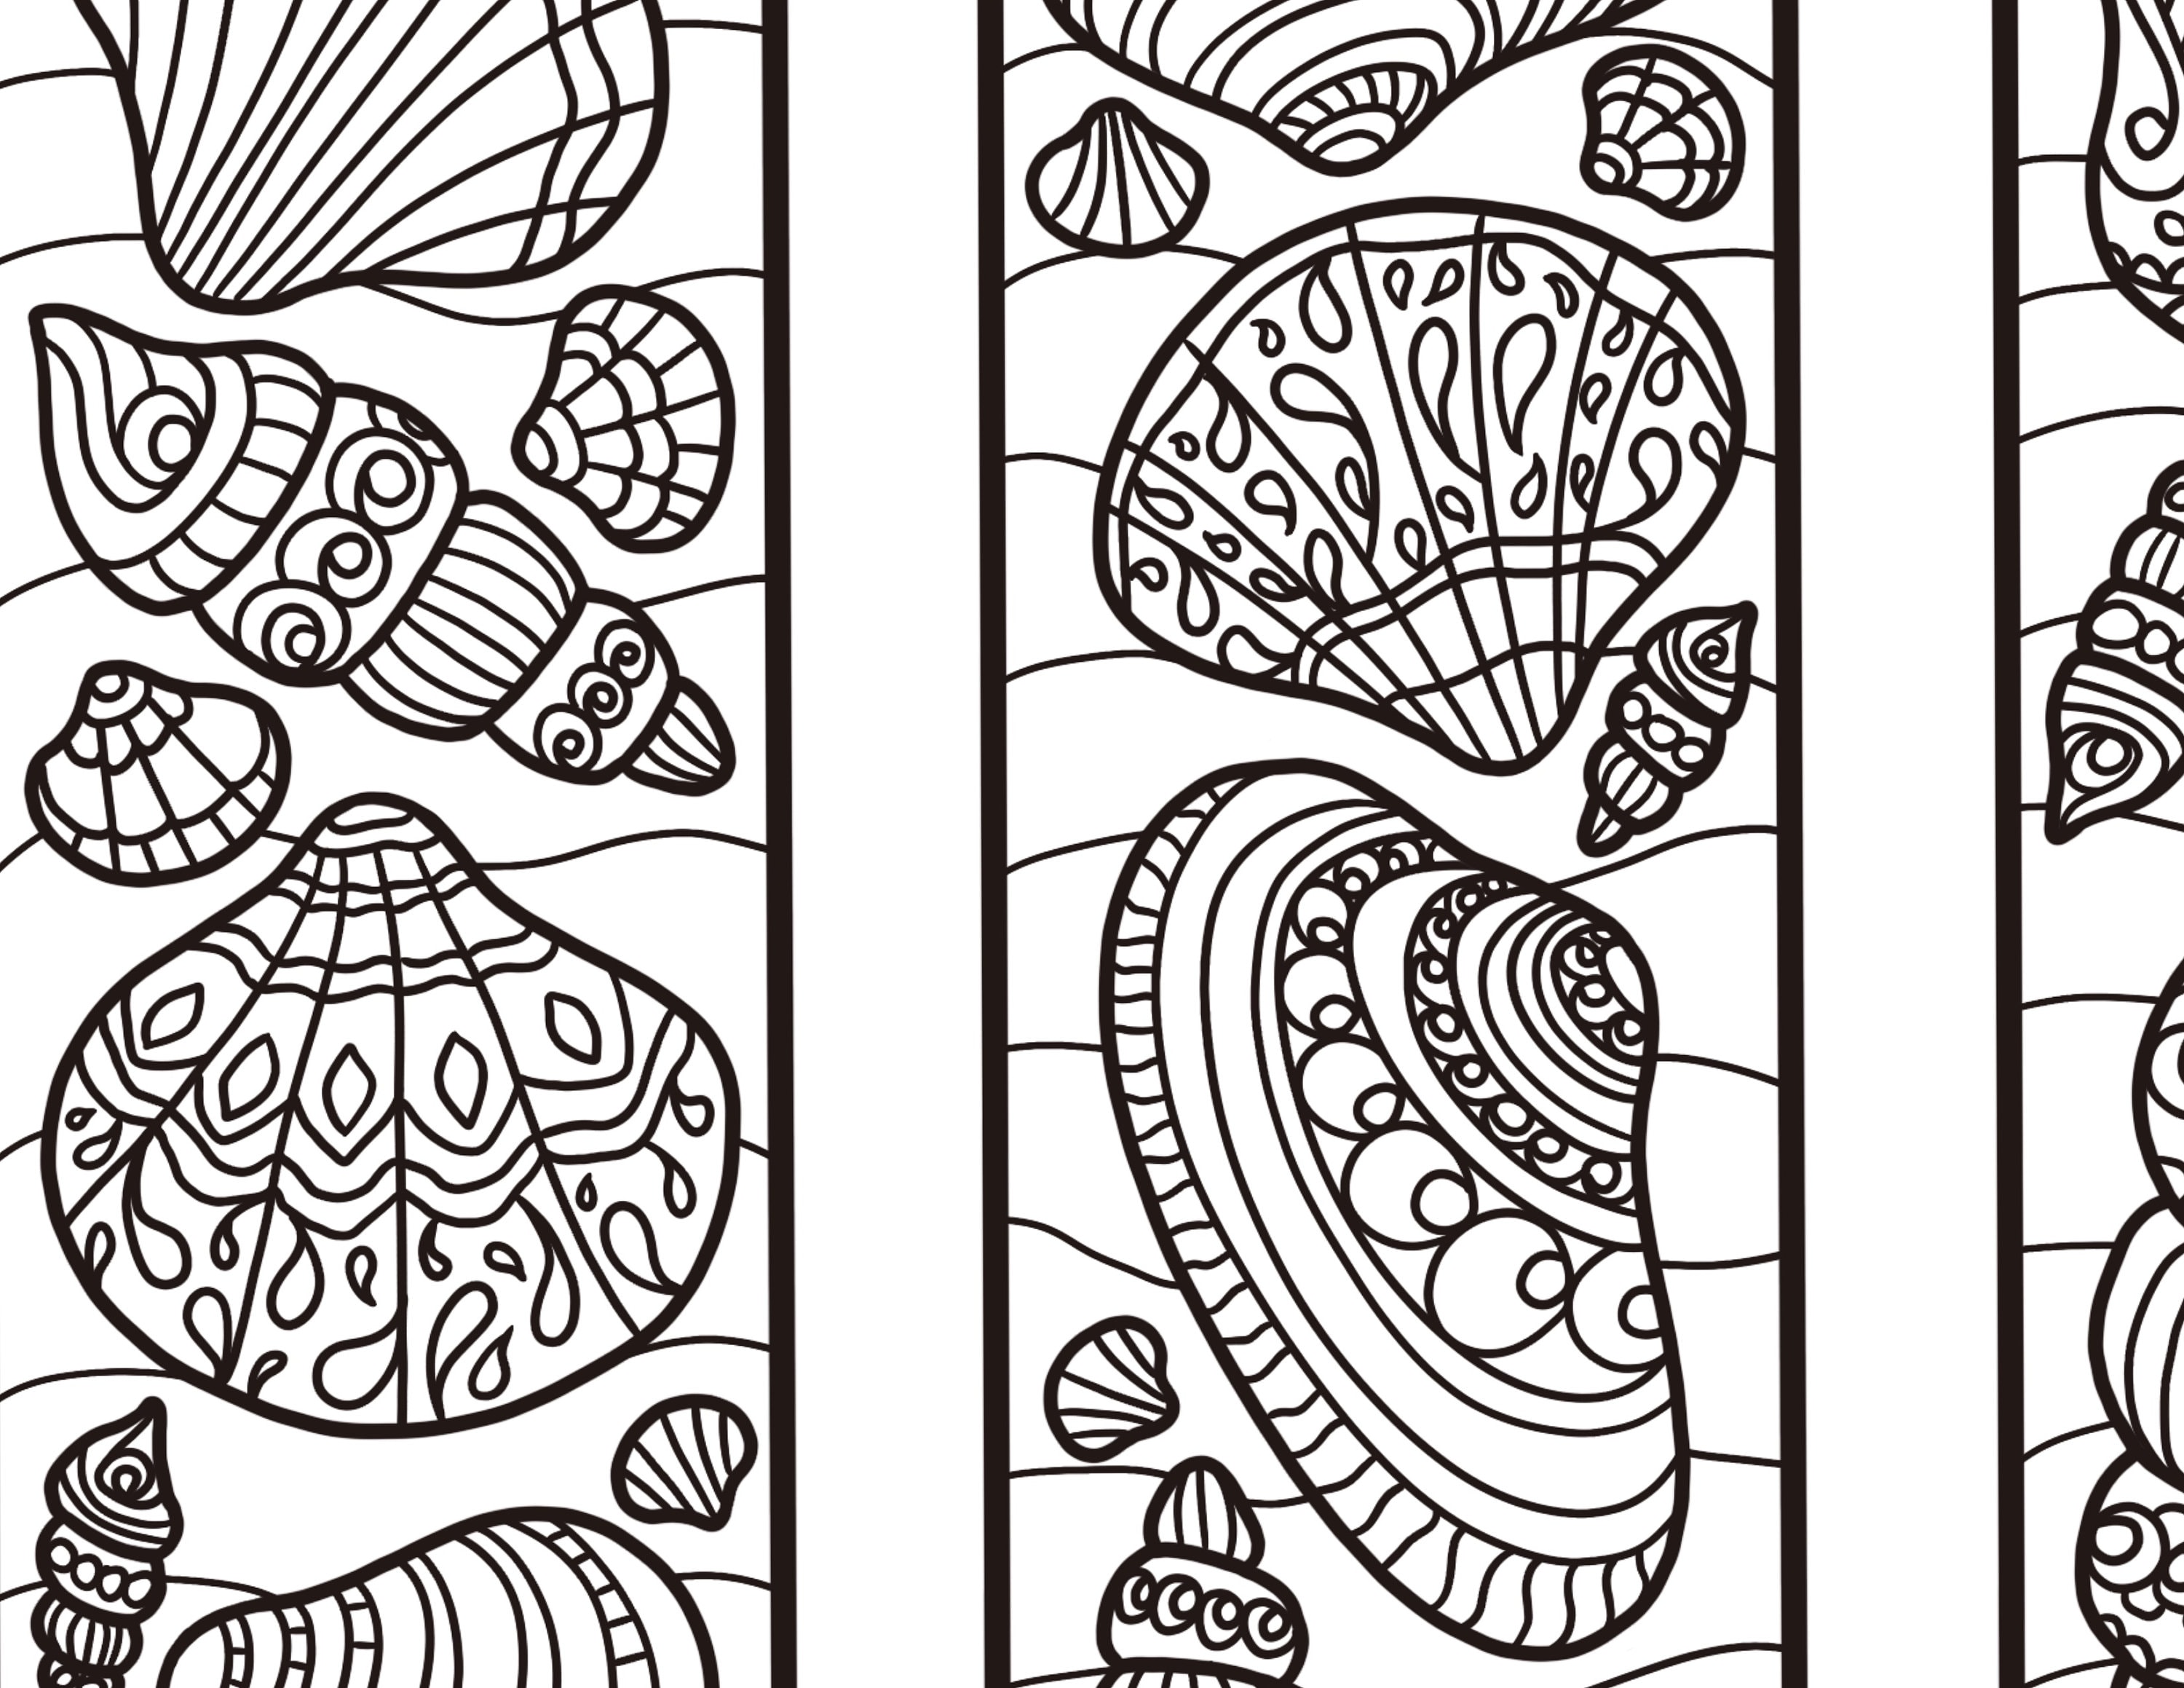 coloring-bookmarks-coloring-bookmark-pdf-coloring-page-etsy